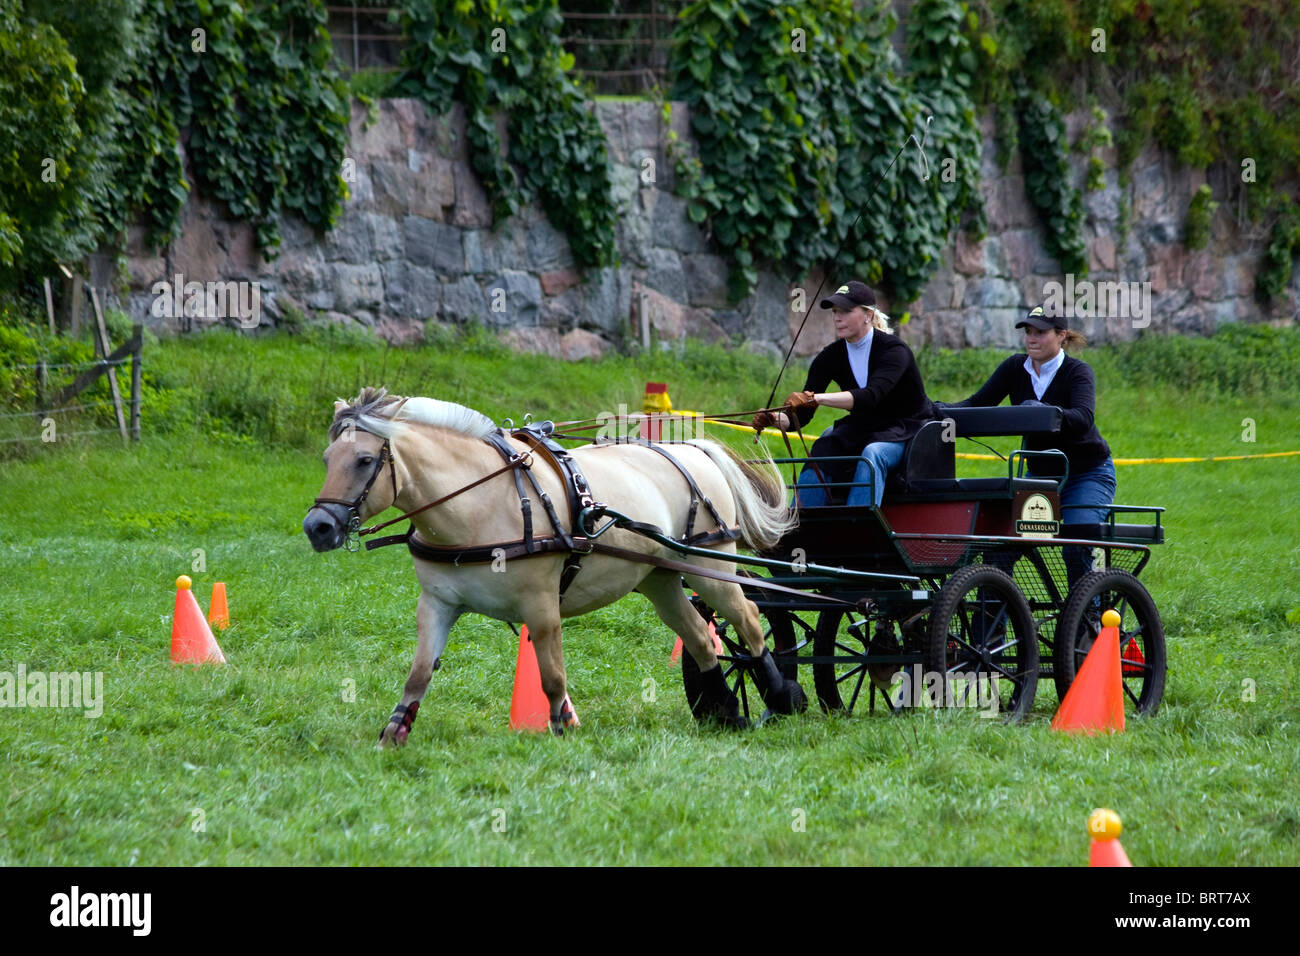 Racing with a horse and a wagon. Stock Photo